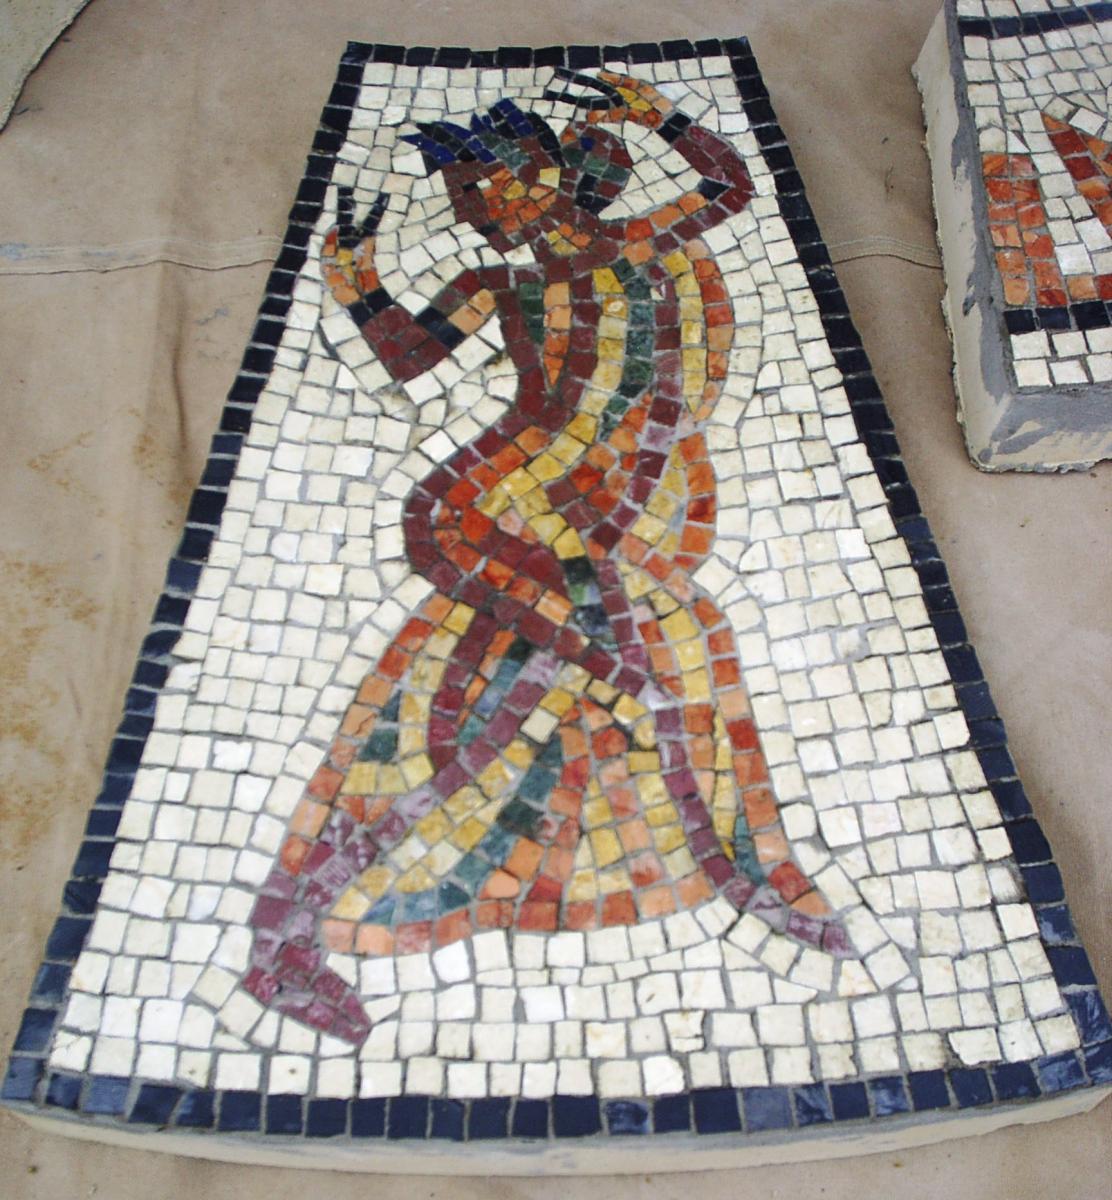 Deatil form a panel of musicians and dancers, 3 rd century AD. Marble mosaic on part of a patio paving set.